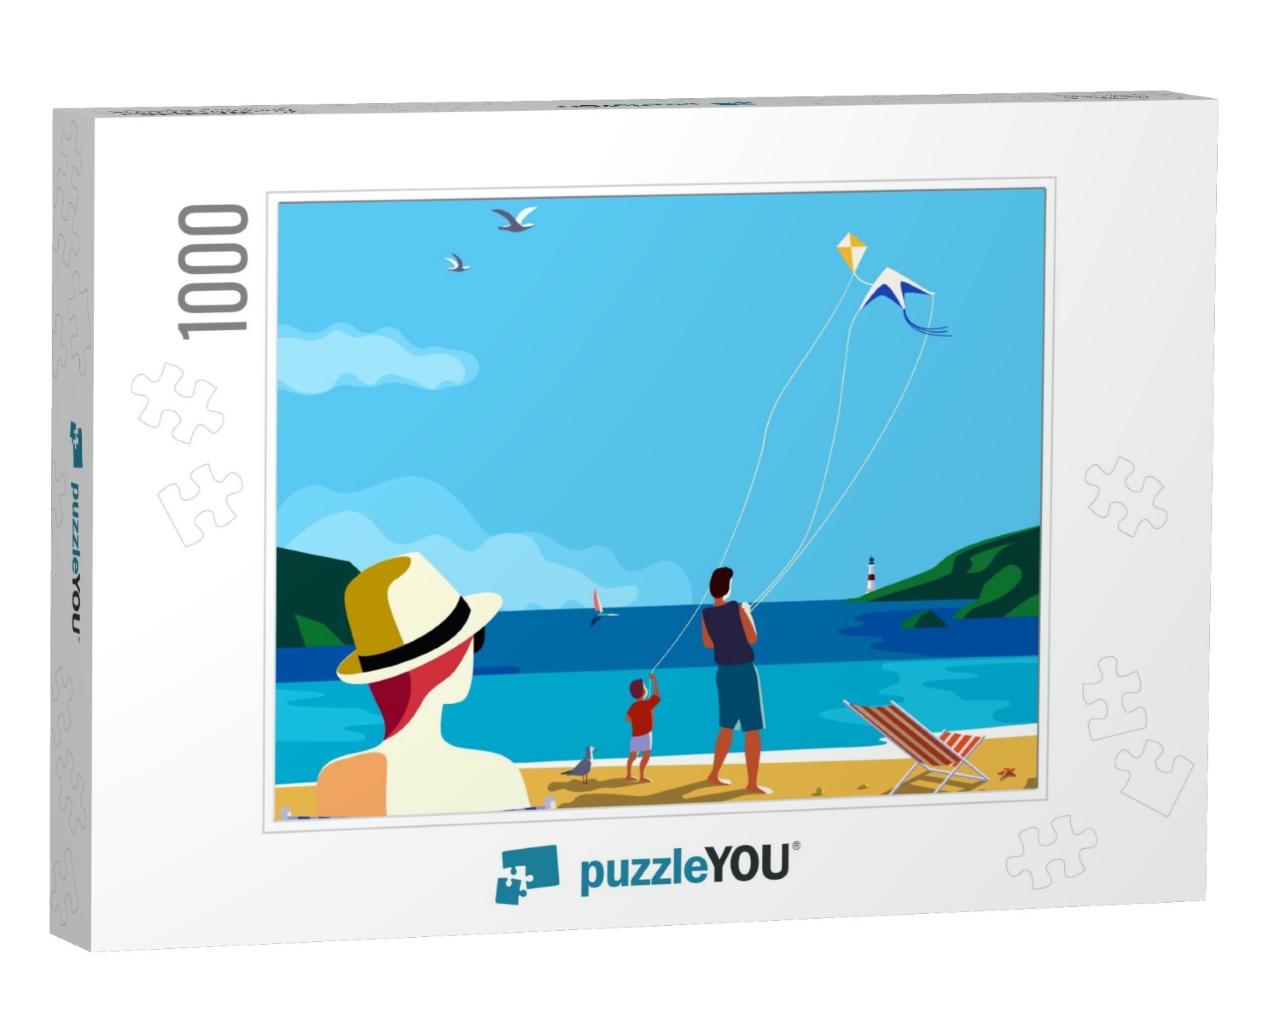 Kiting on Sea Beach. Family Leisure Activity on Sand Seas... Jigsaw Puzzle with 1000 pieces